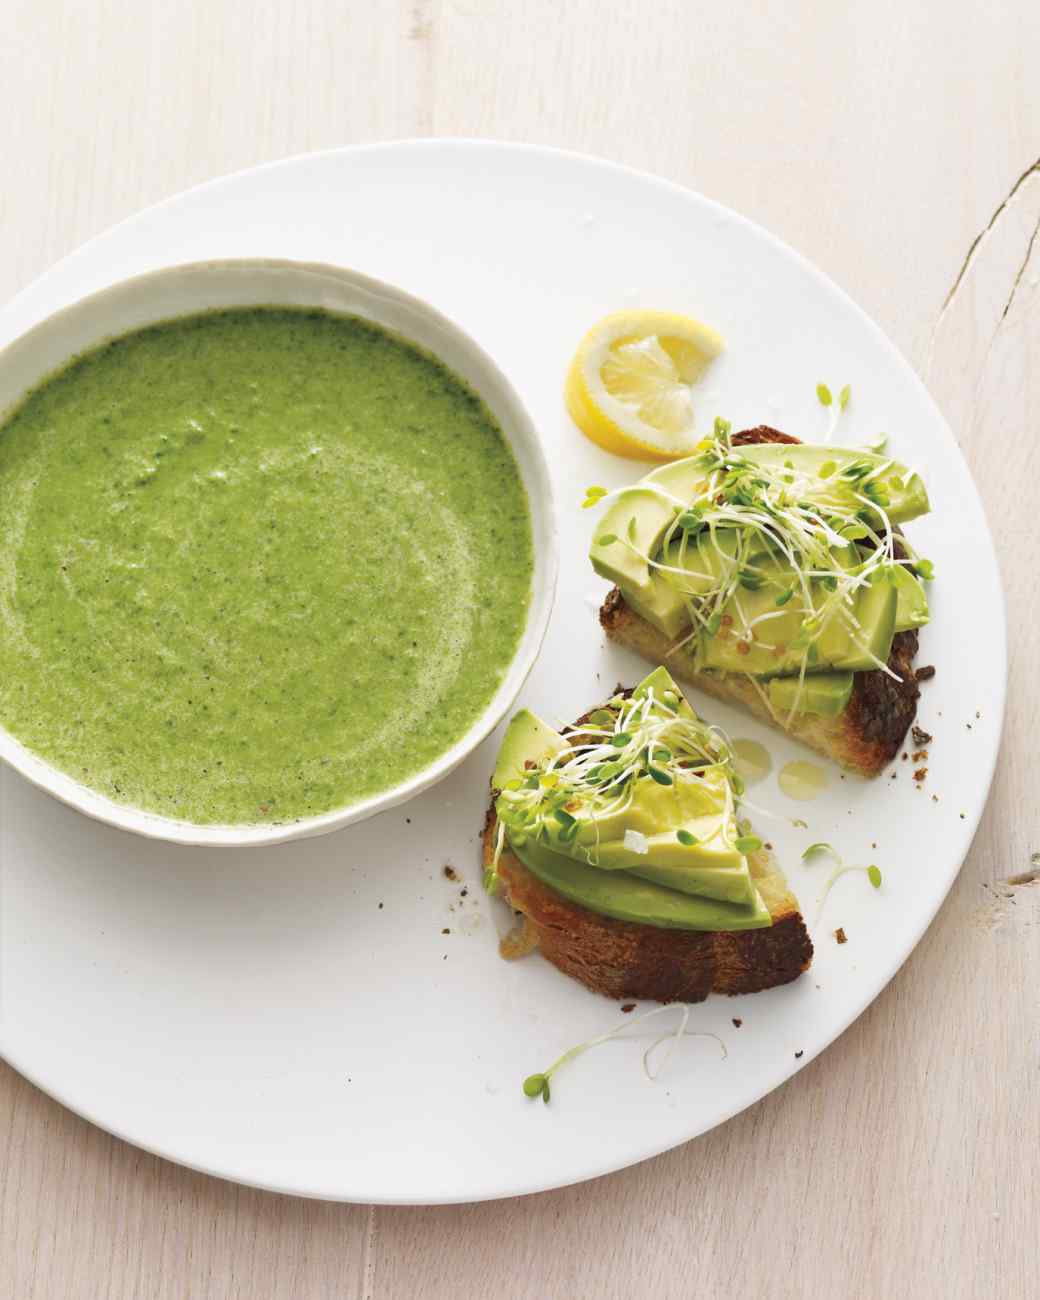 Broccoli-Spinach Soup with Avocado Toasts